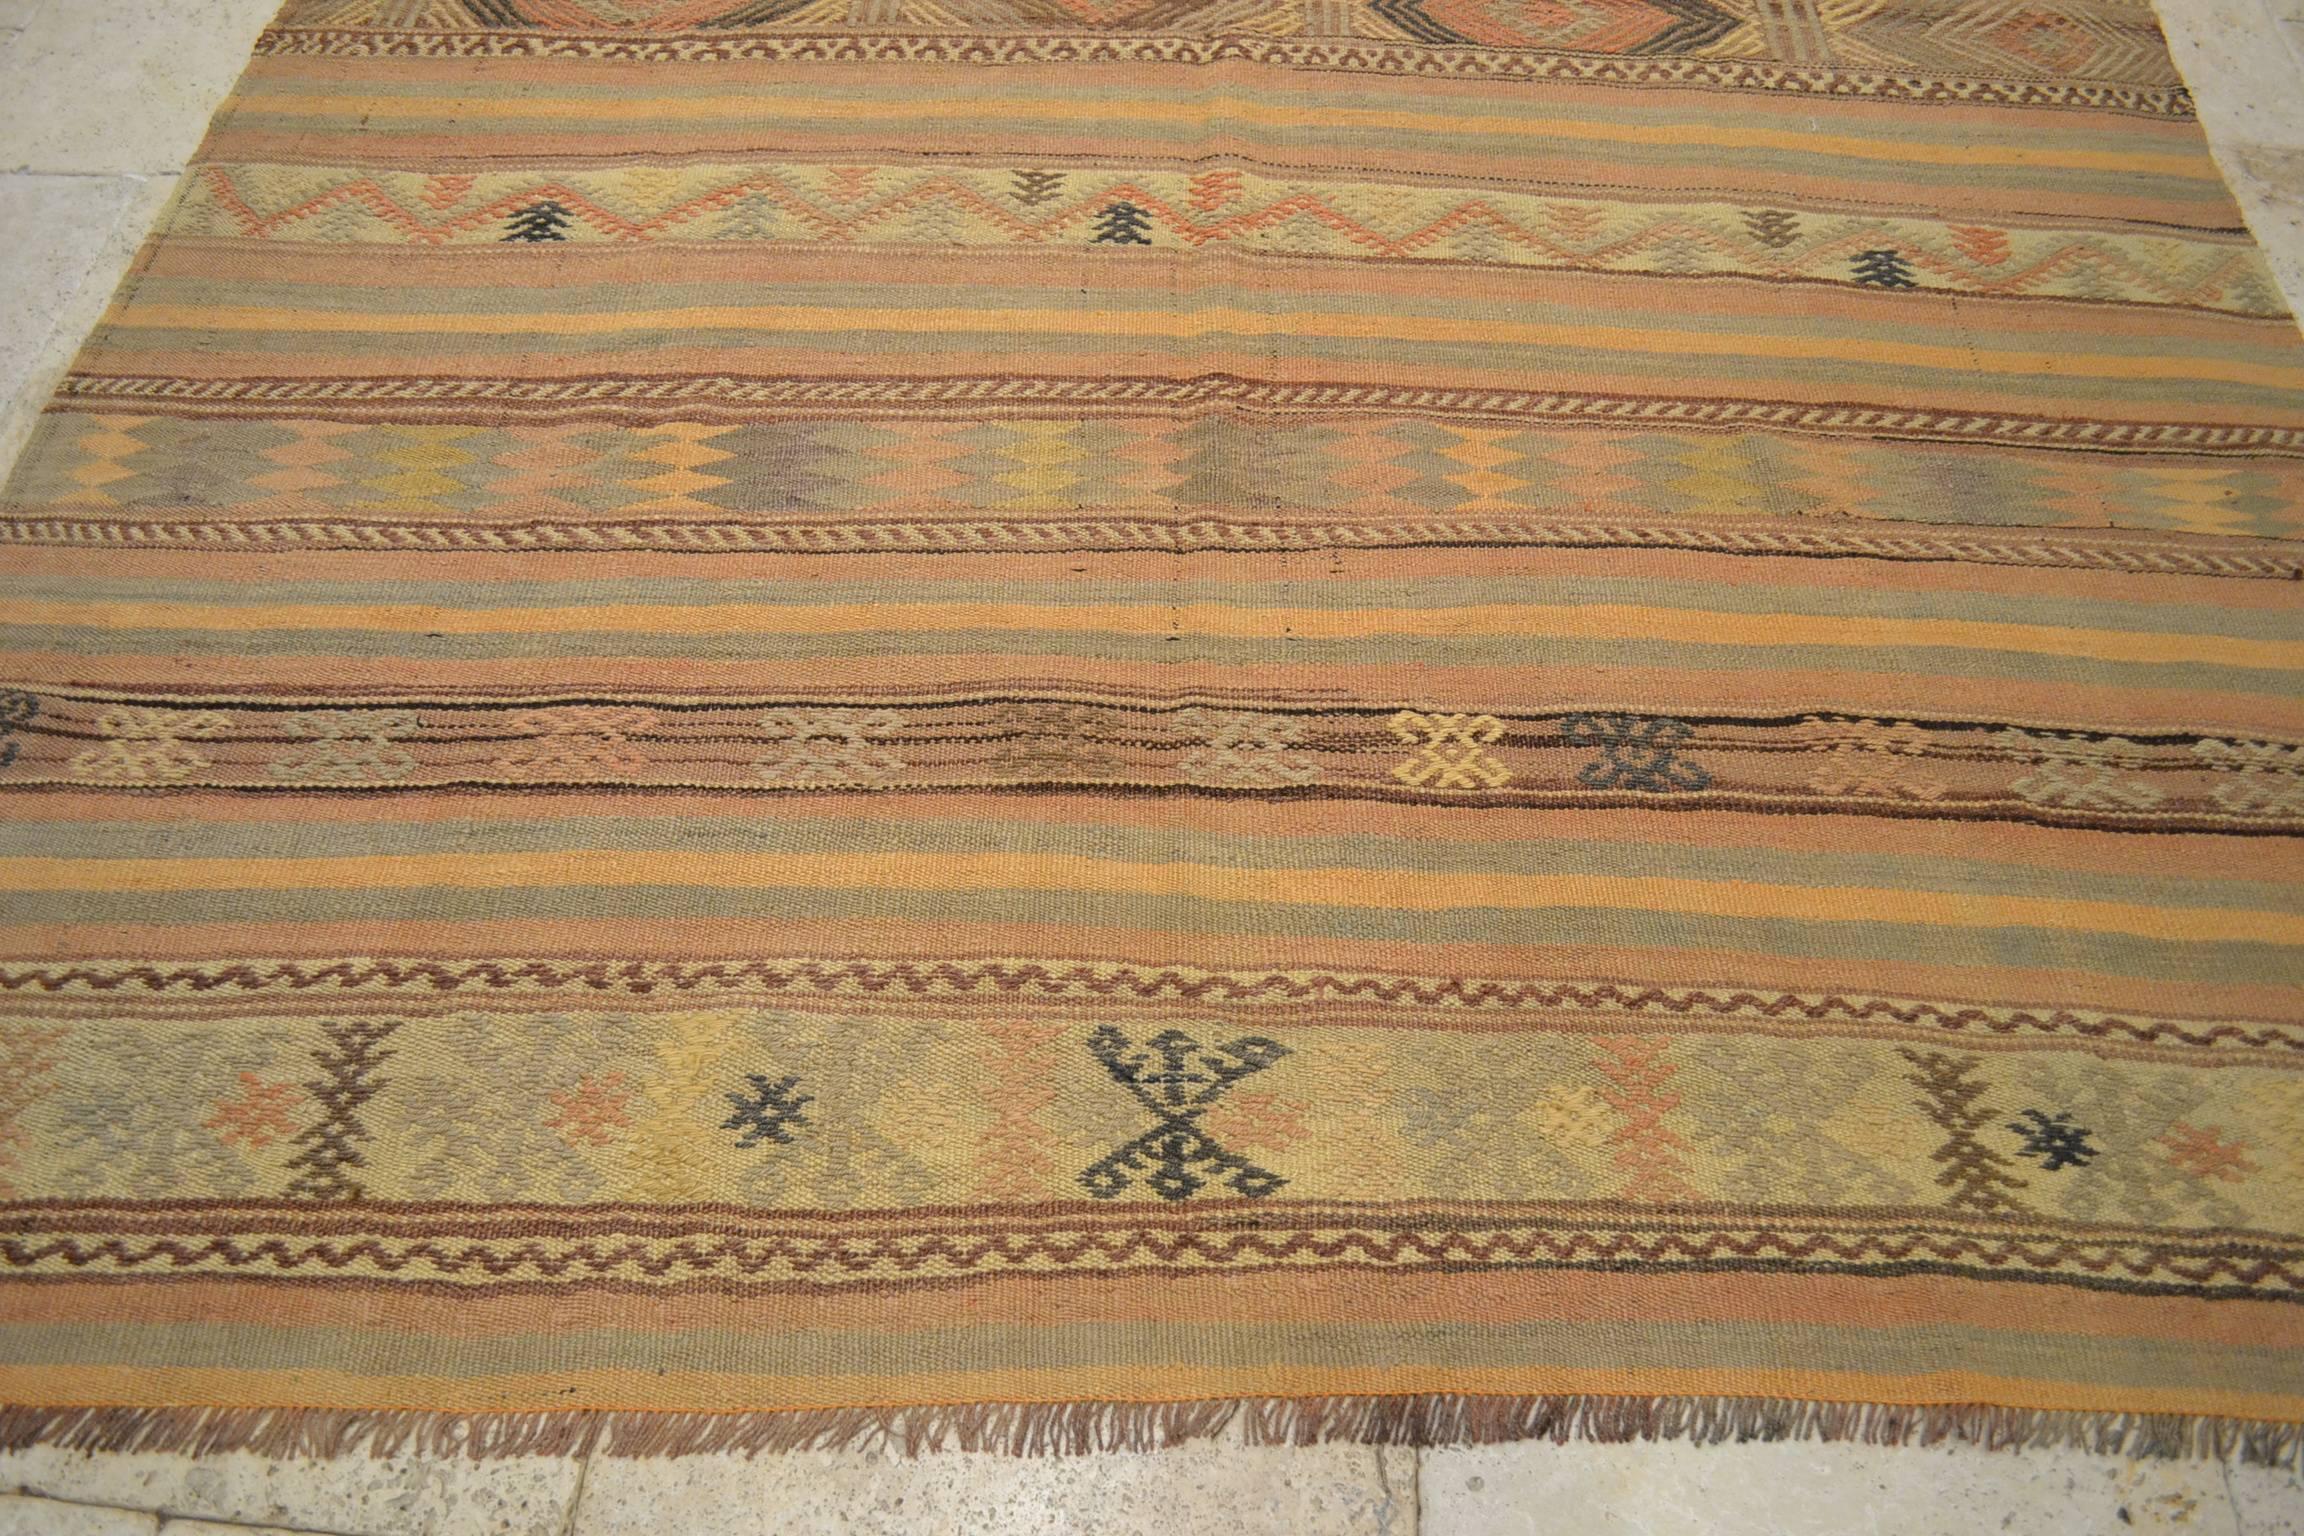 Vintage Anatolian Turkish Kilim Flat-Weave Rug In Good Condition For Sale In Houston, TX